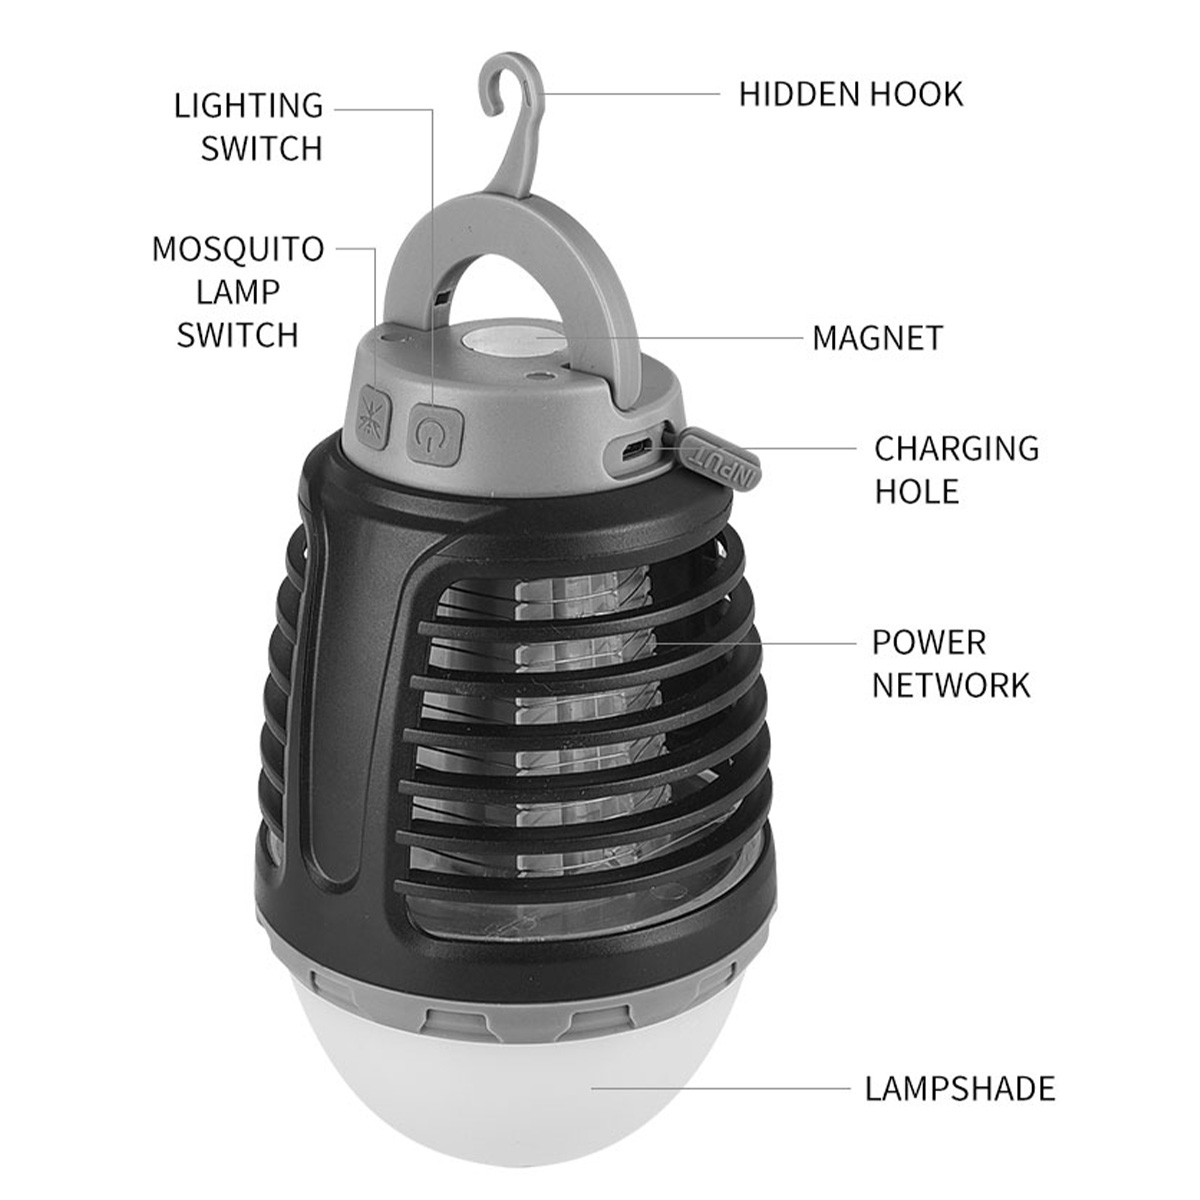 70-Lumens-2-in-1-LED-Zapper-Light-Bulbs-Mosquito-Killer-Lamp-4-Modes-USB-Rechargeable-Hook-Hanging-C-1727489-3